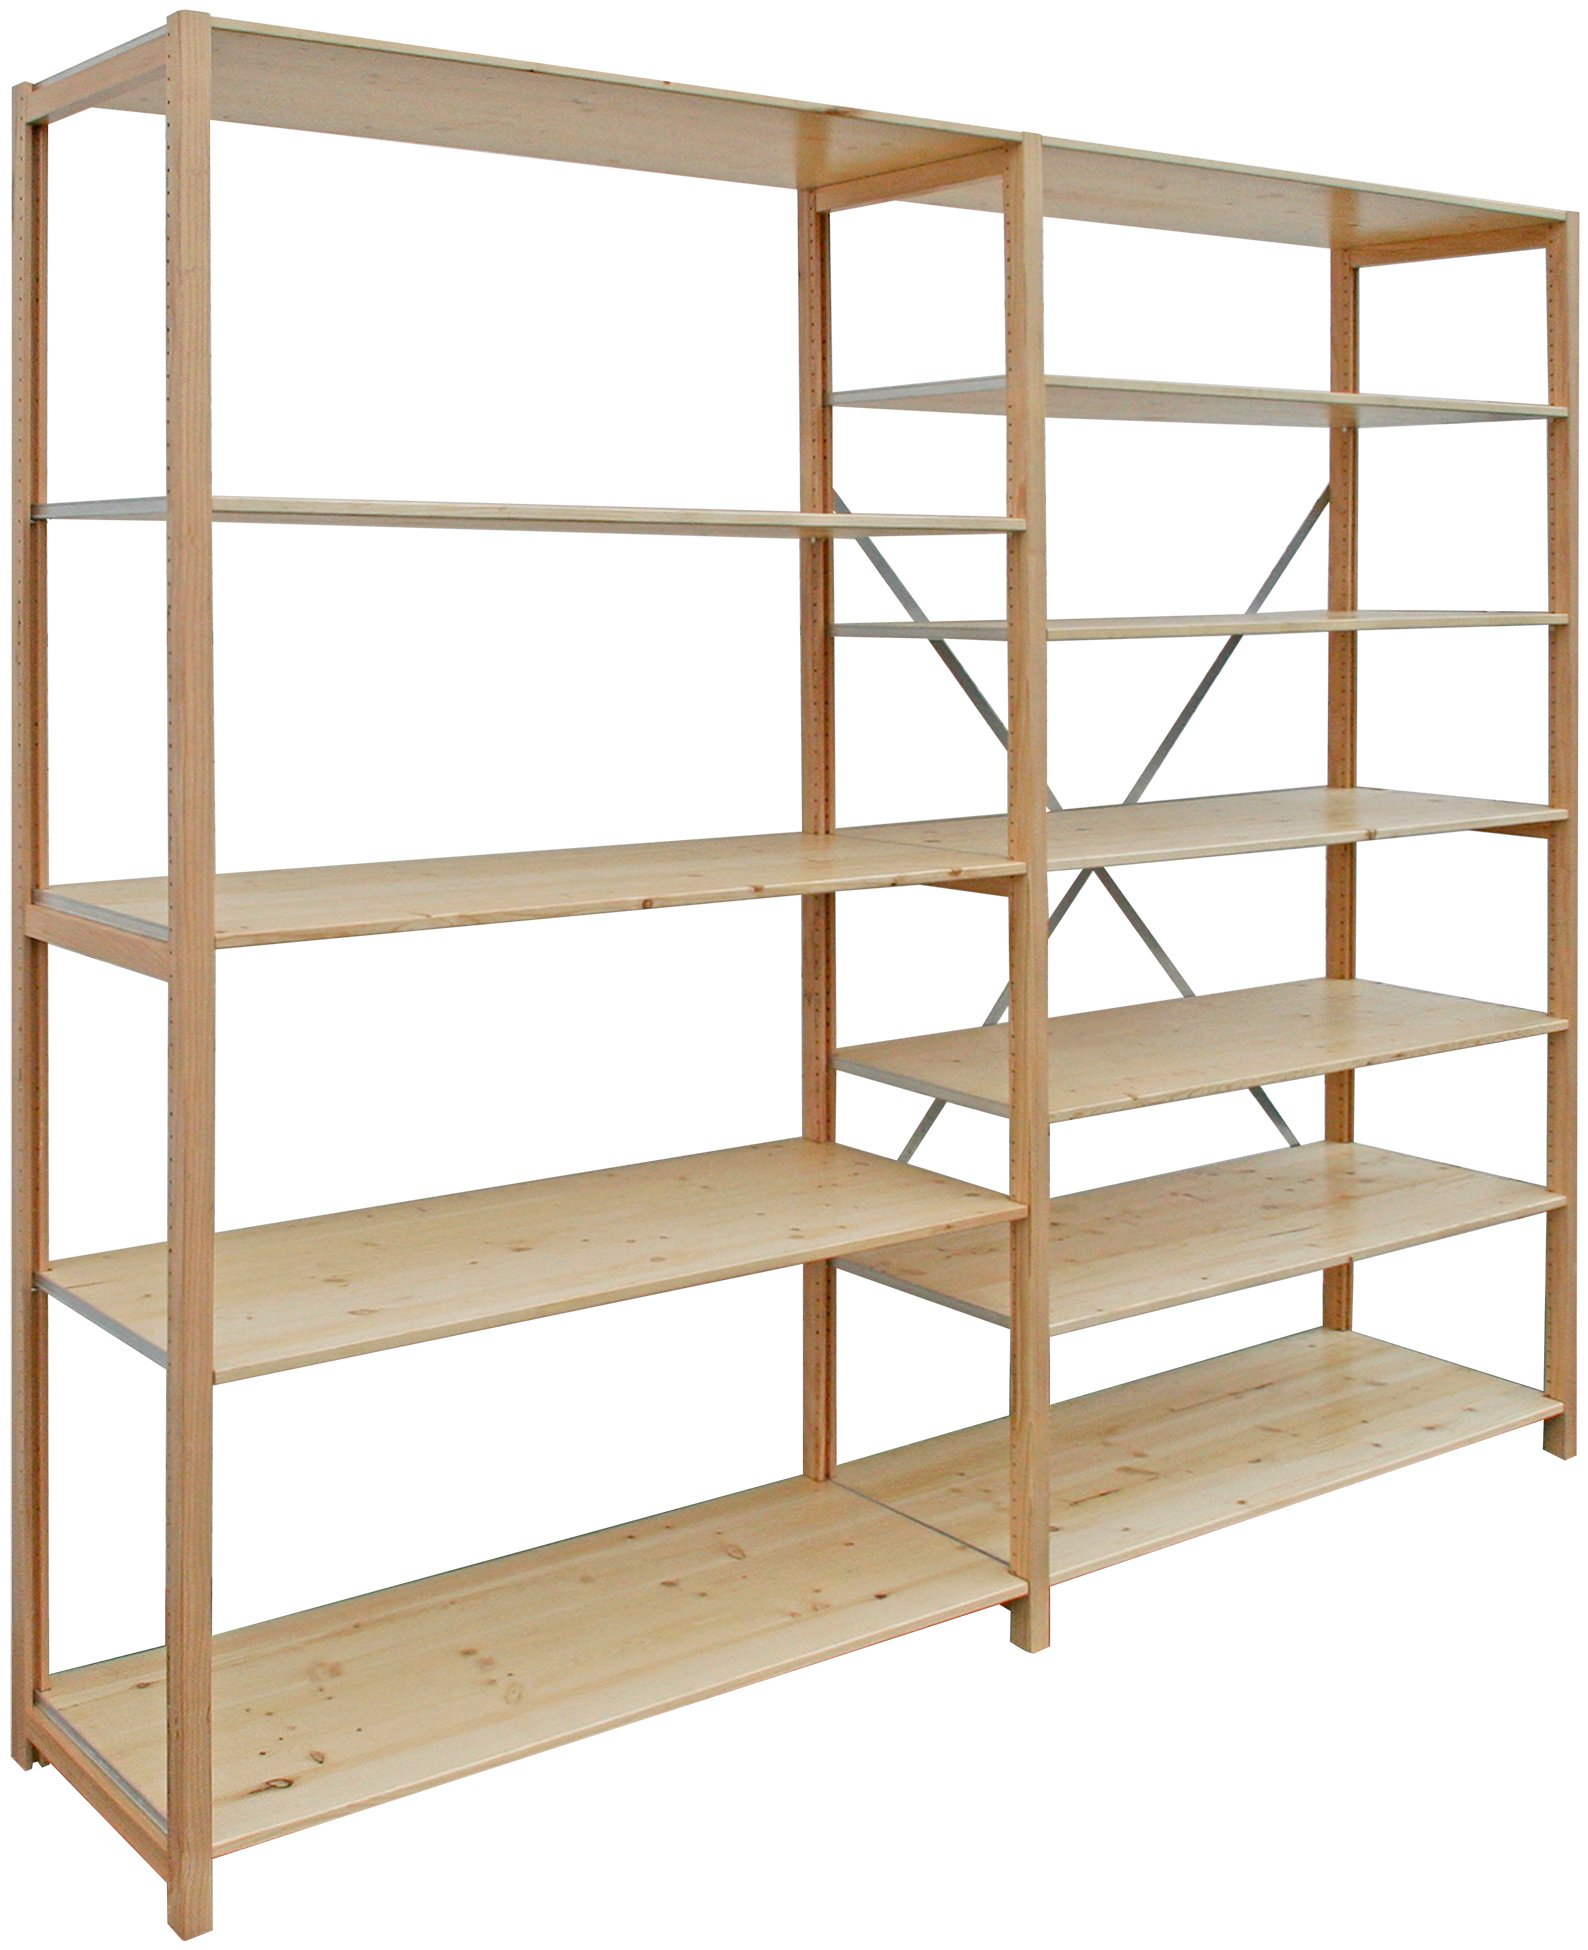 NEWOOD's NEWSelect Shelving – 100% Compatible with Lundia Shelving